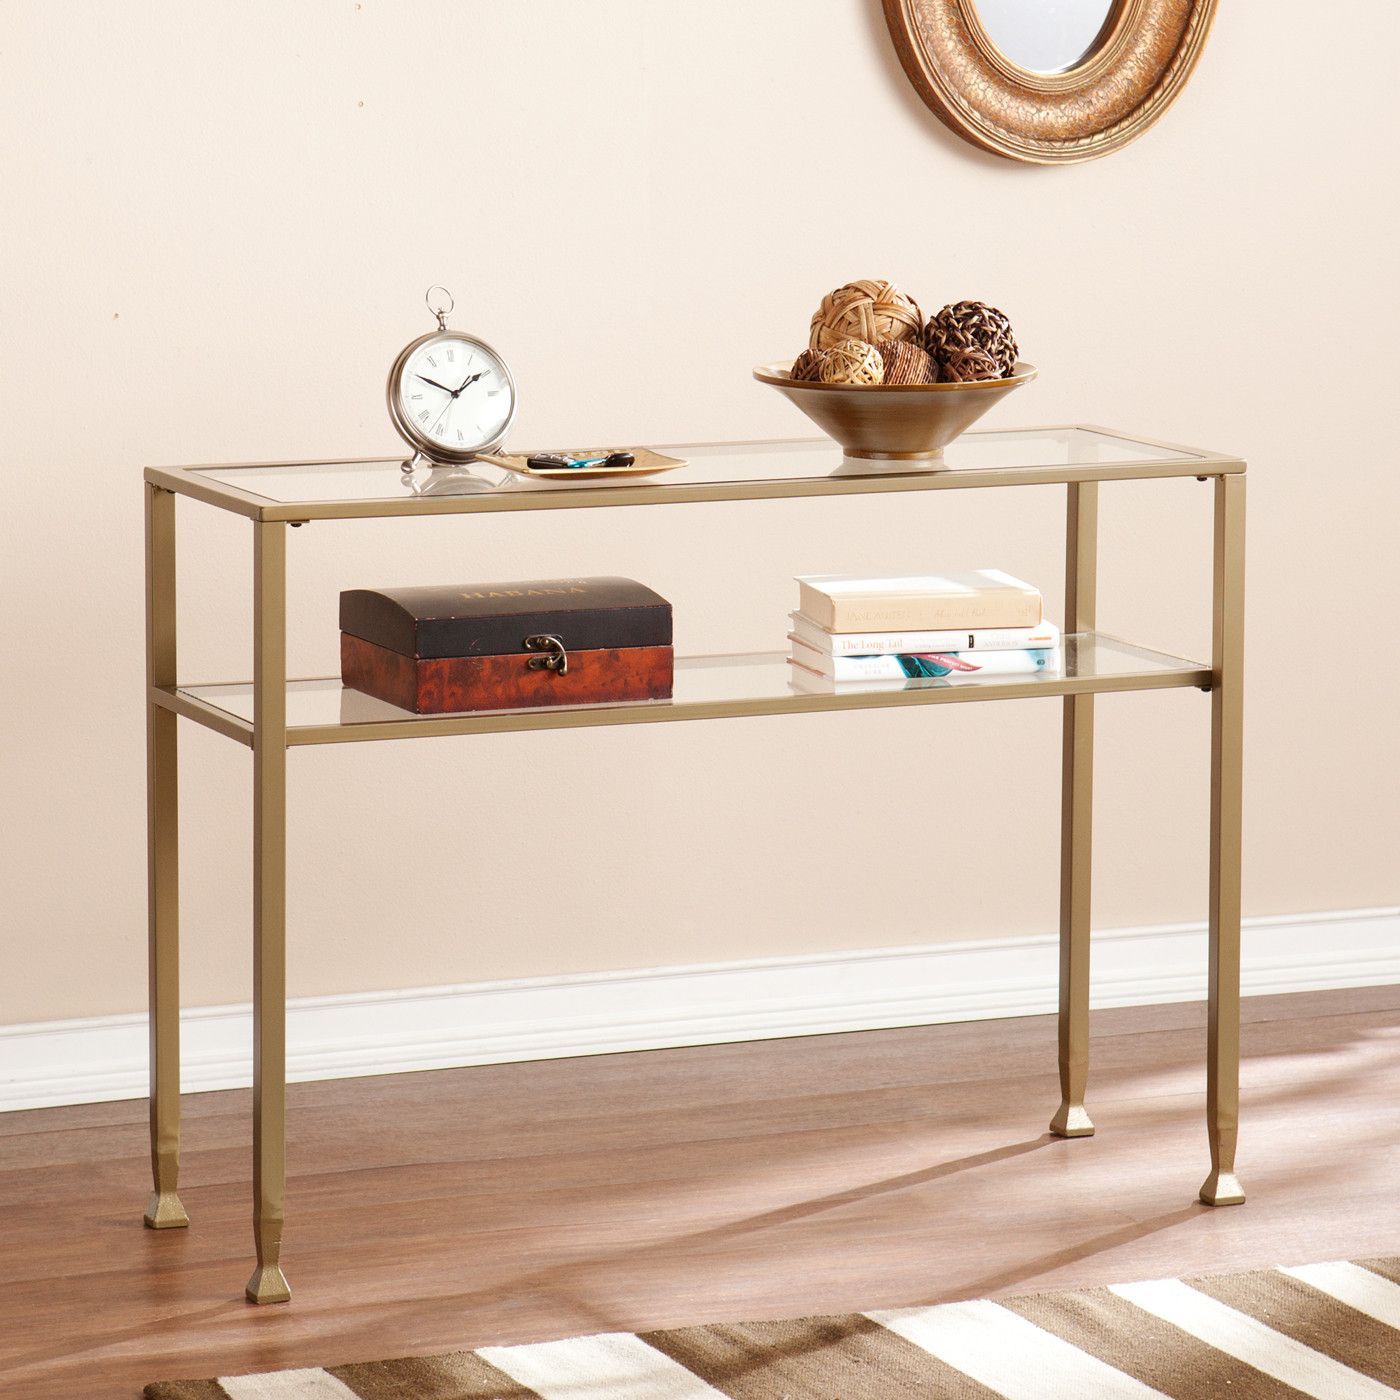 Gold Metal And Glass Console Table | Contemporary Console Within Glass And Gold Oval Console Tables (View 3 of 20)